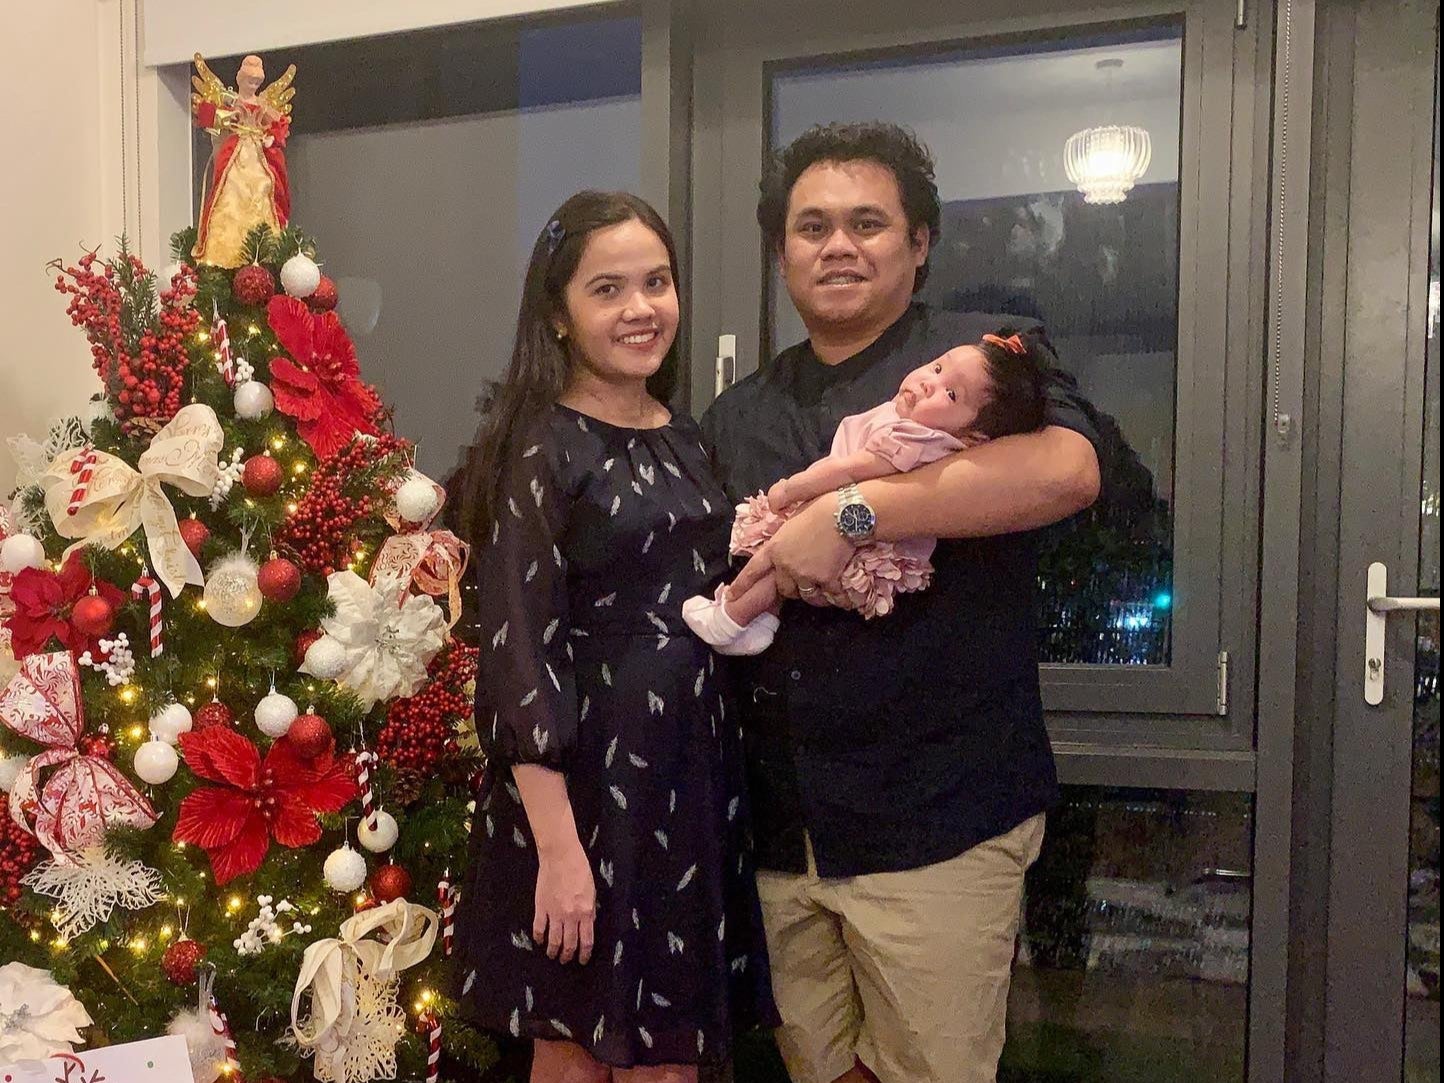 &nbsp;Eva Gicain with her husband Limuel and baby Elleana